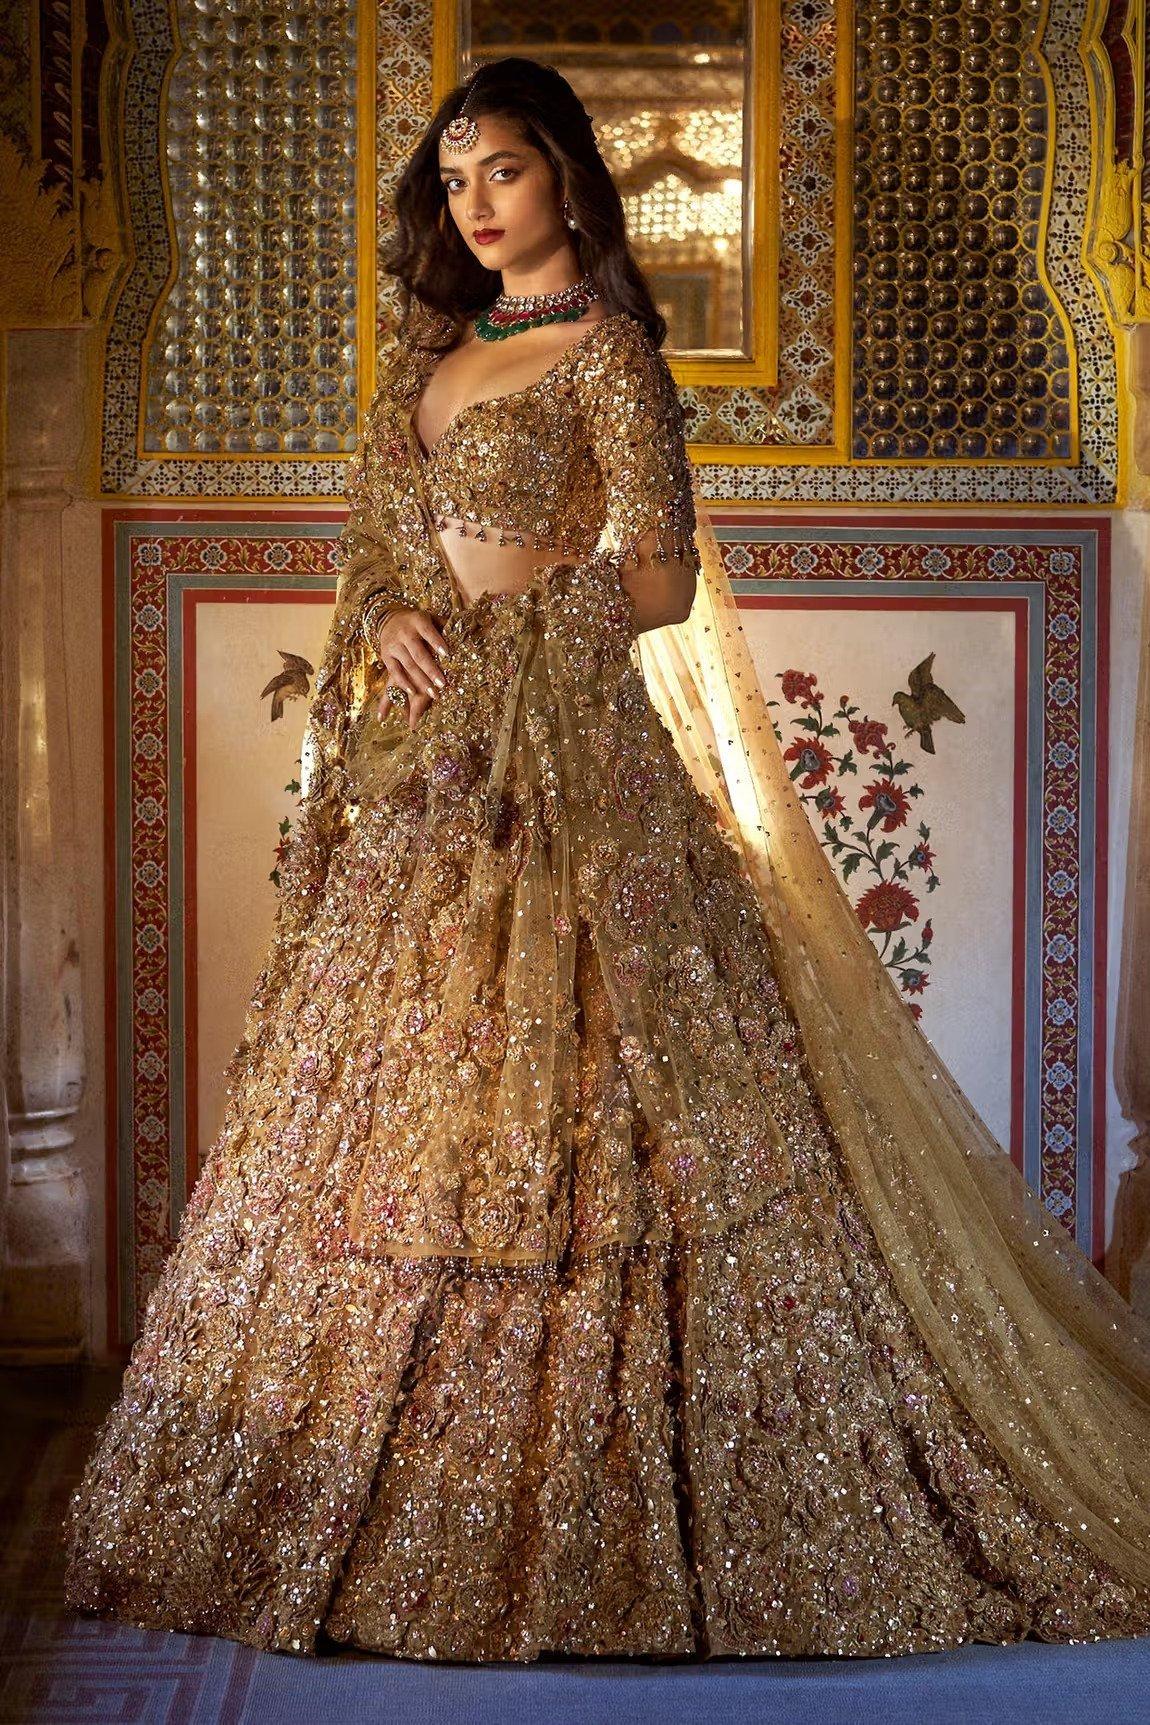 10 Best Floral Lehenga Designs To Flaunt This Summer-suu.vn